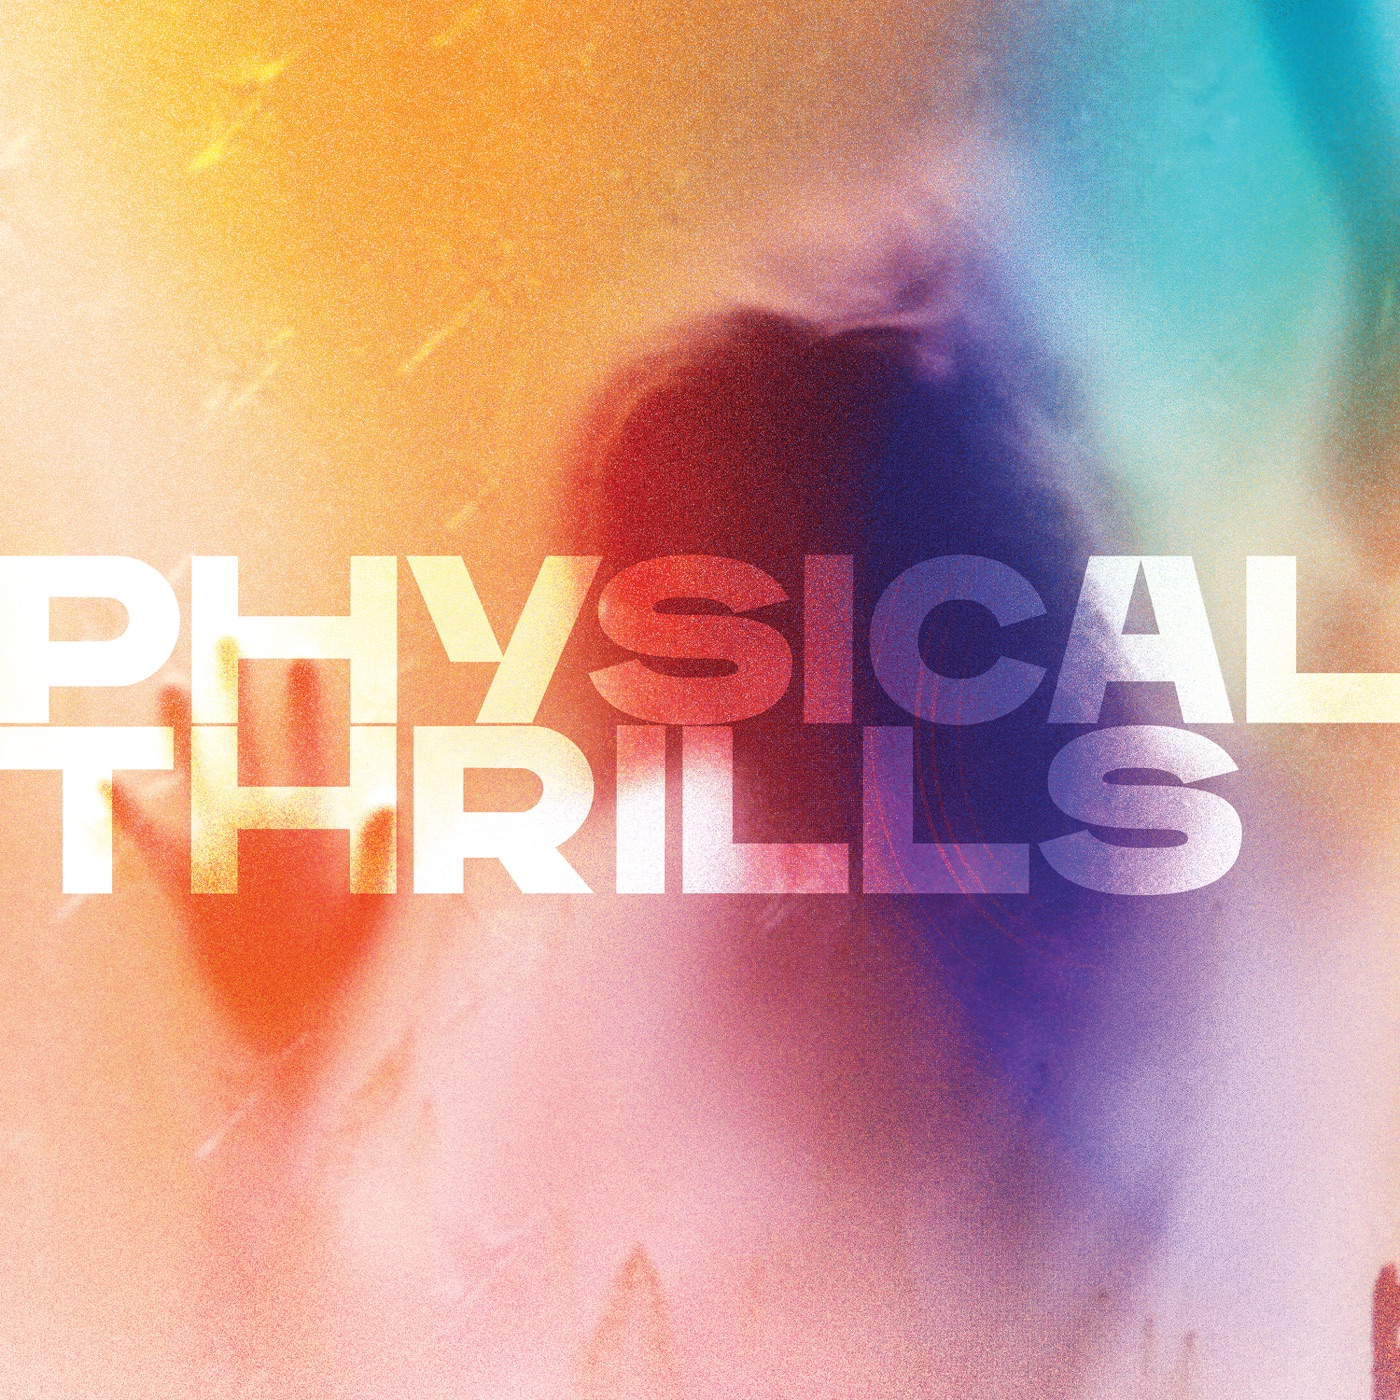 Physical Thrills by Silversun Pickups